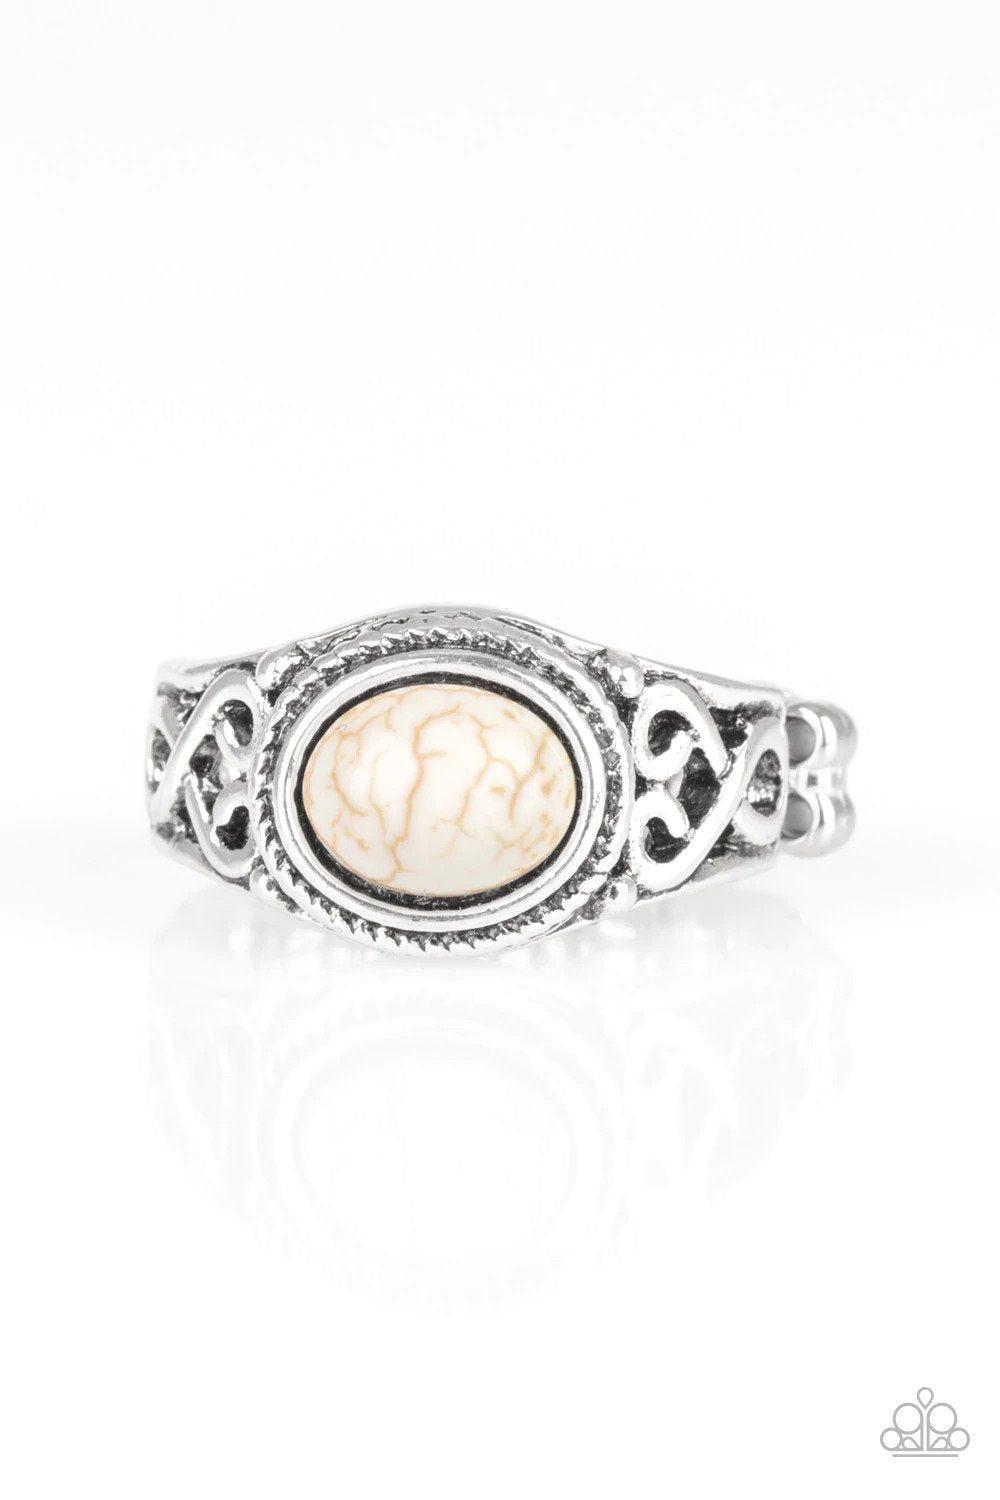 Set In Stone White Ring - Paparazzi Accessories- lightbox - CarasShop.com - $5 Jewelry by Cara Jewels